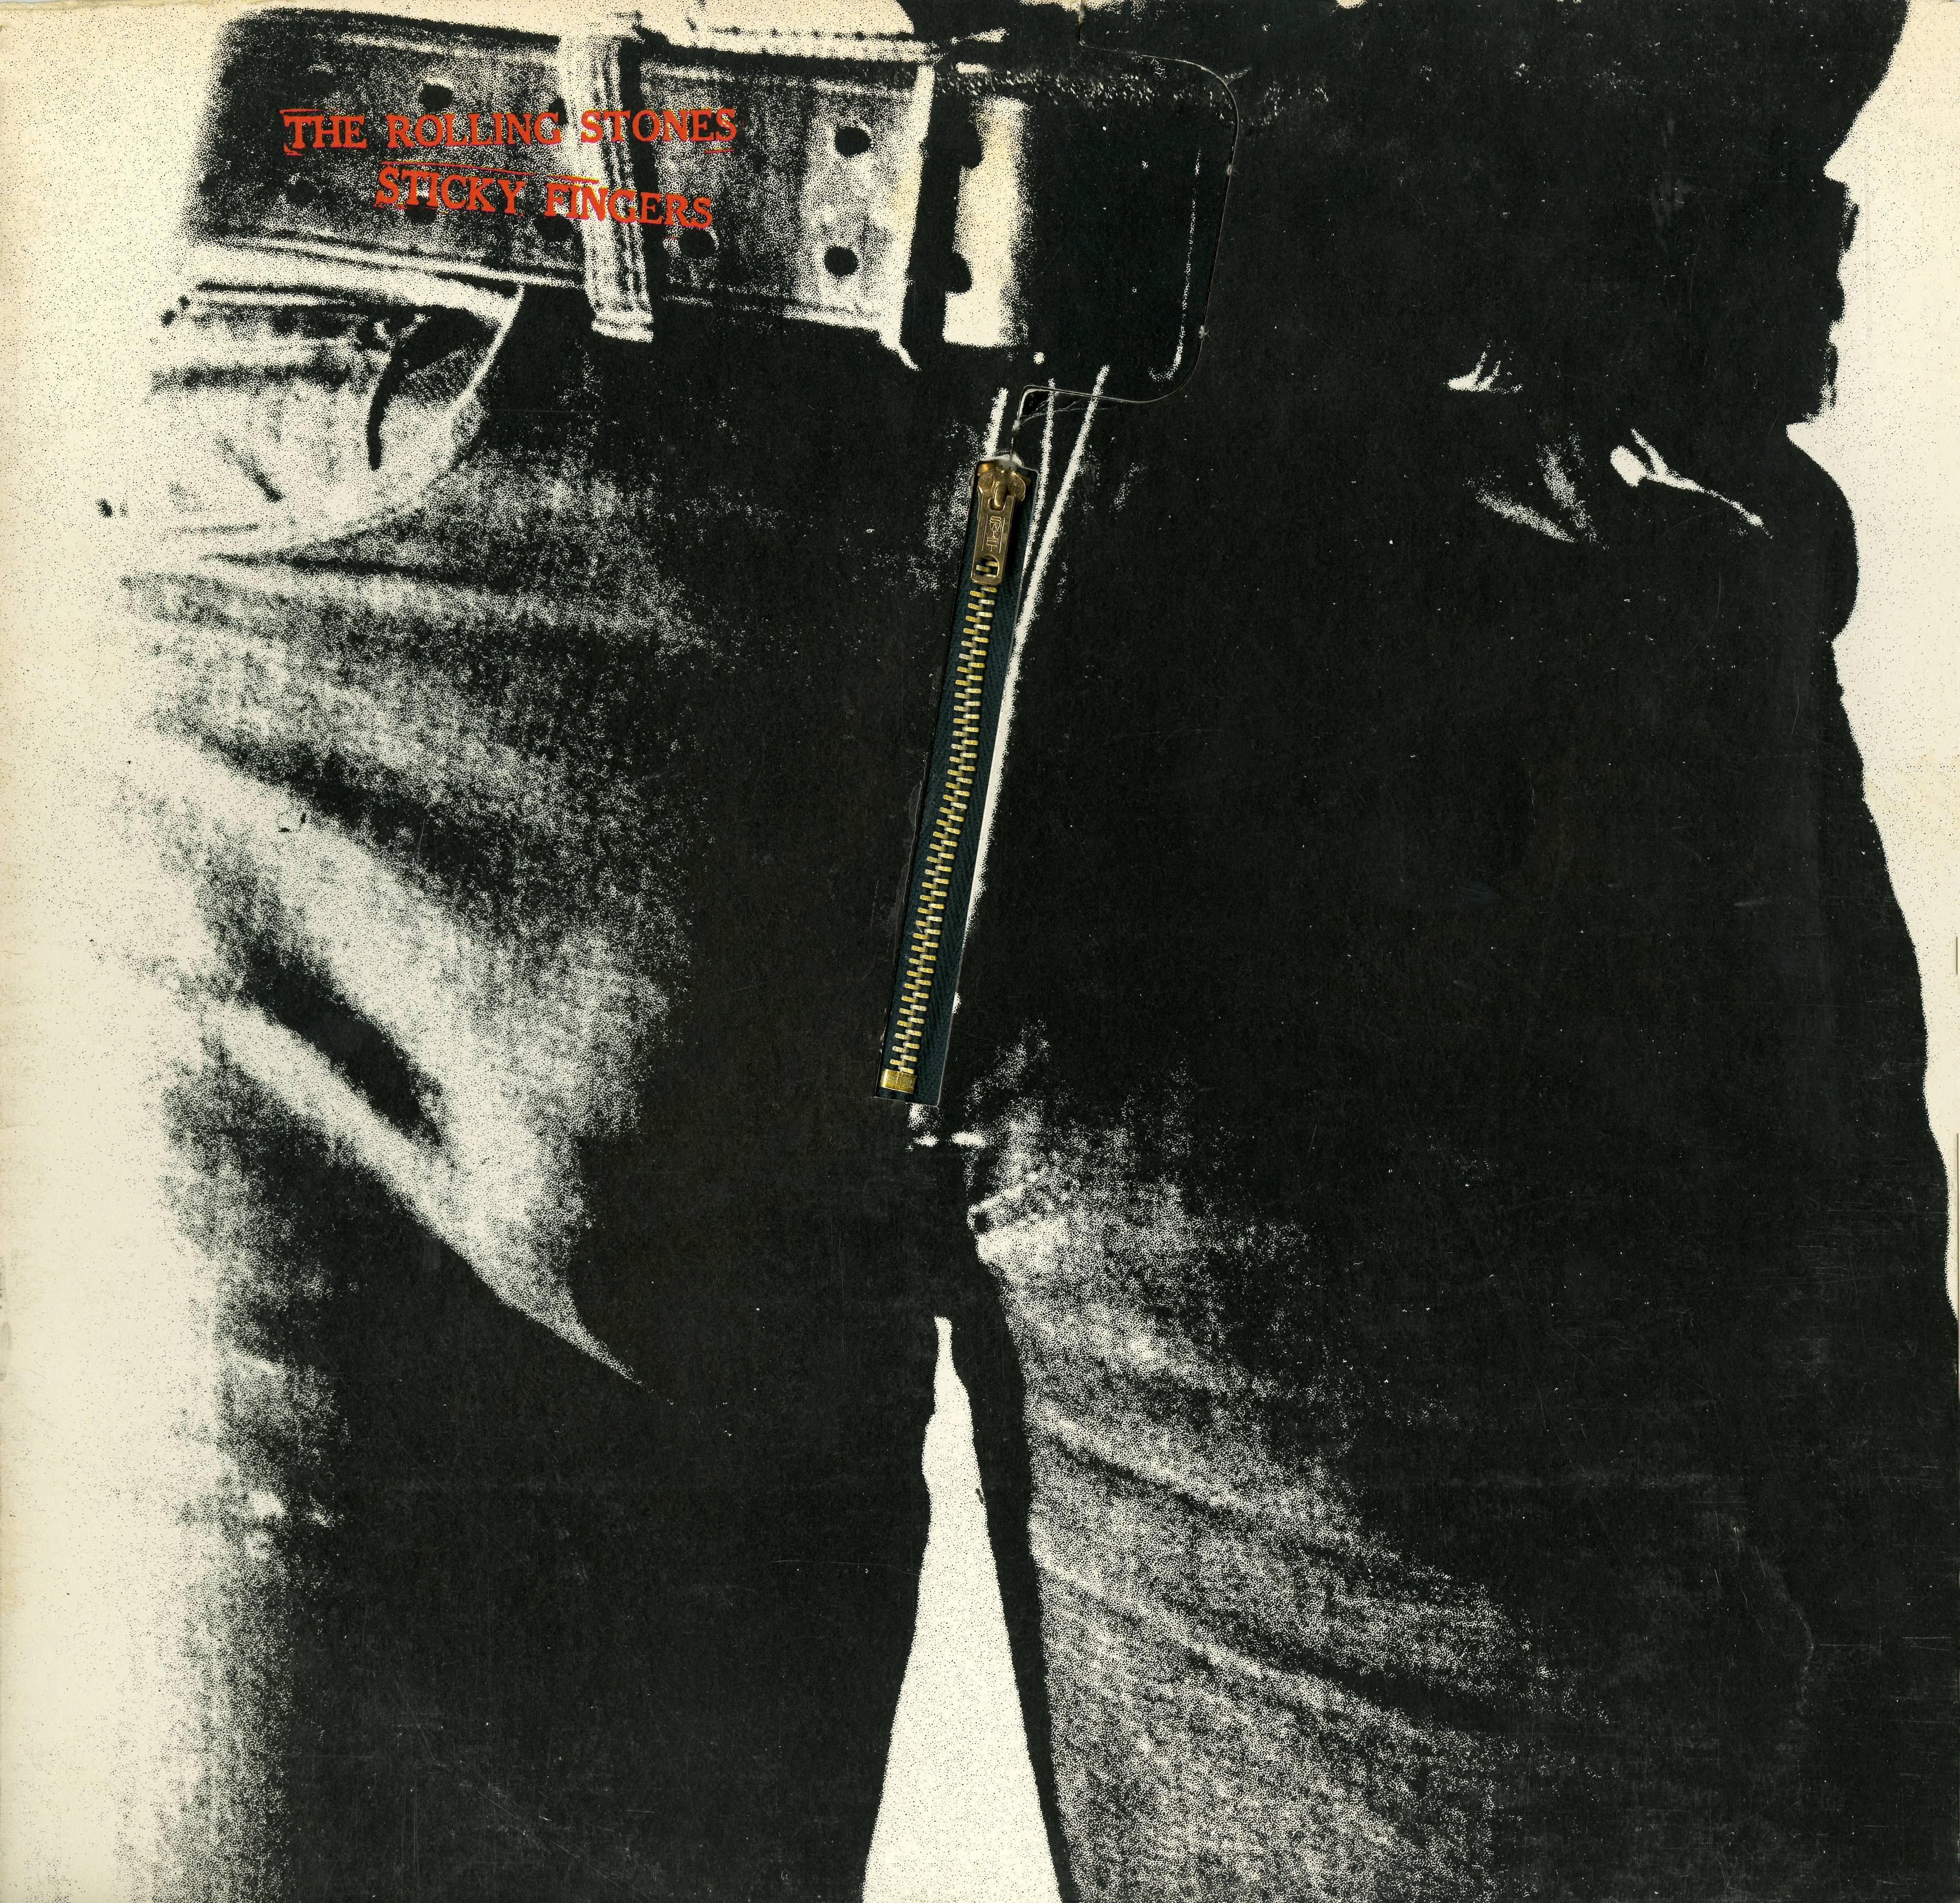 The Rolling Stones Sticky Fingers Vinyl Album featuring Original Cover Art by Andy Warhol

Cover is in Excellent condition. Zipper in full working order with cover free of any rips or tears in this area. Vinyl is in very good condition with the